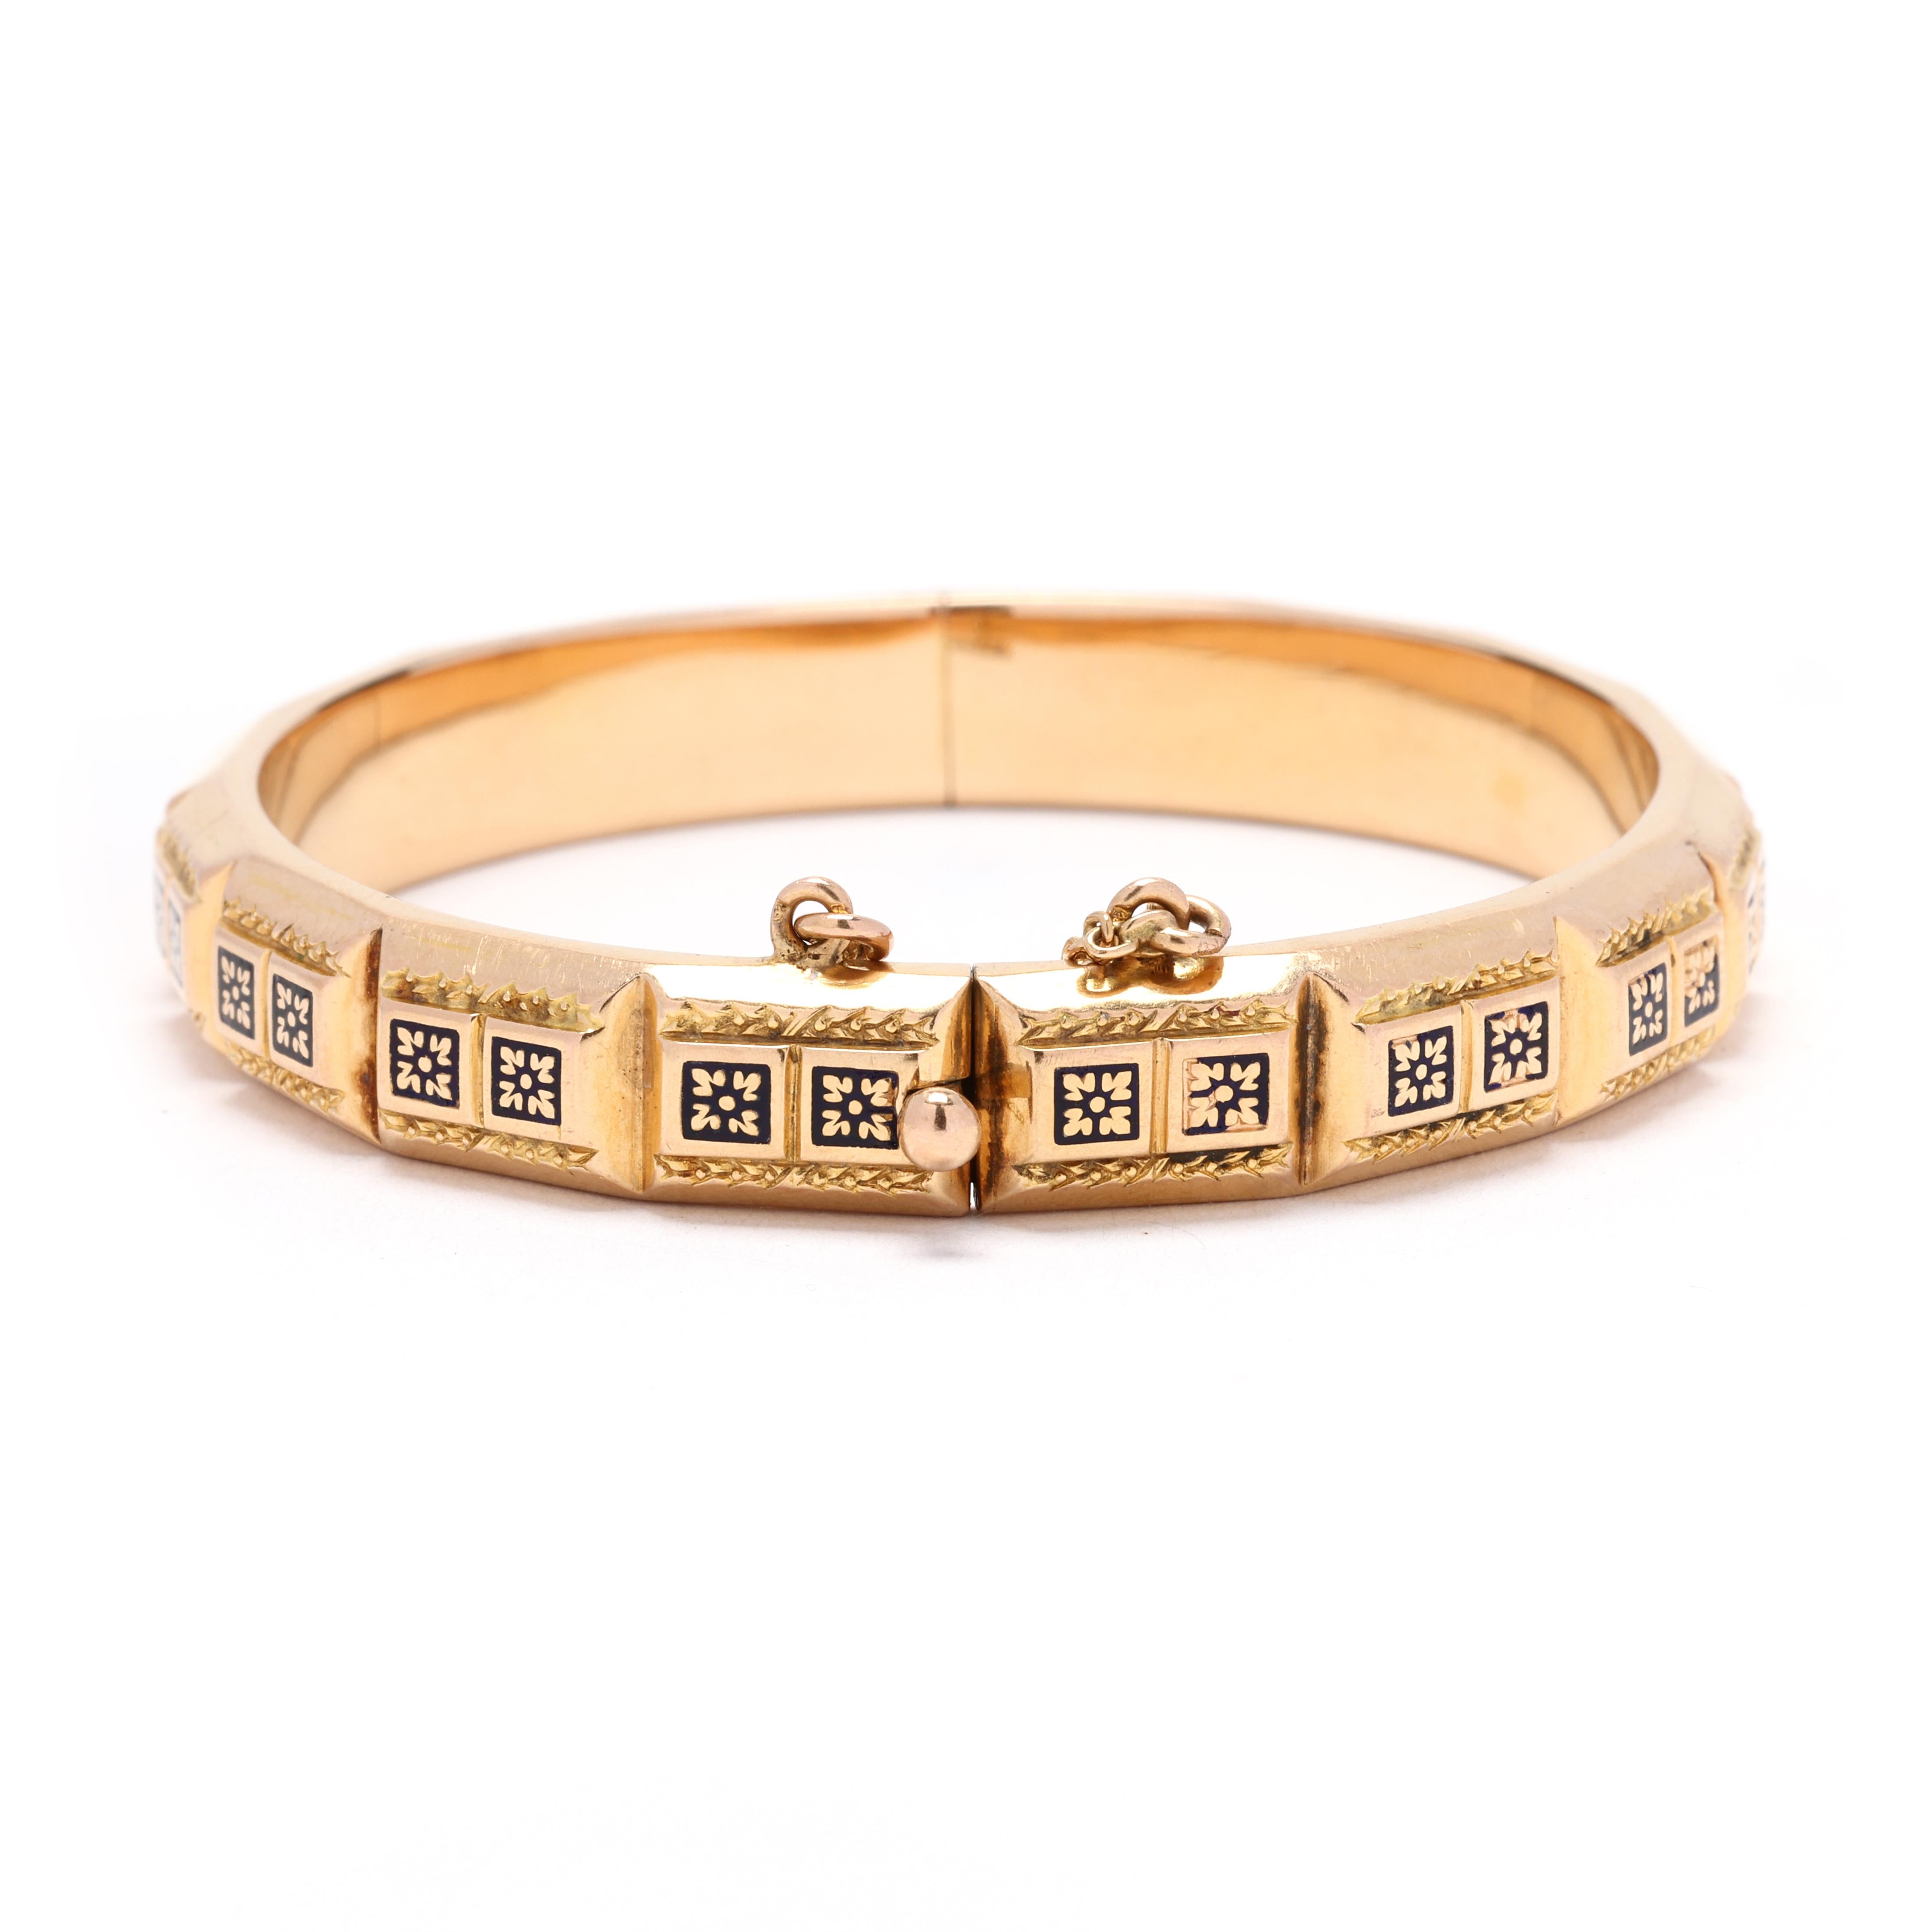 Add a touch of glamour and sophistication to your jewelry collection with this exquisite antique French 18k yellow gold enamel bangle bracelet. Crafted with intricate detailing and vibrant enamel work, this bracelet is a true work of art. The